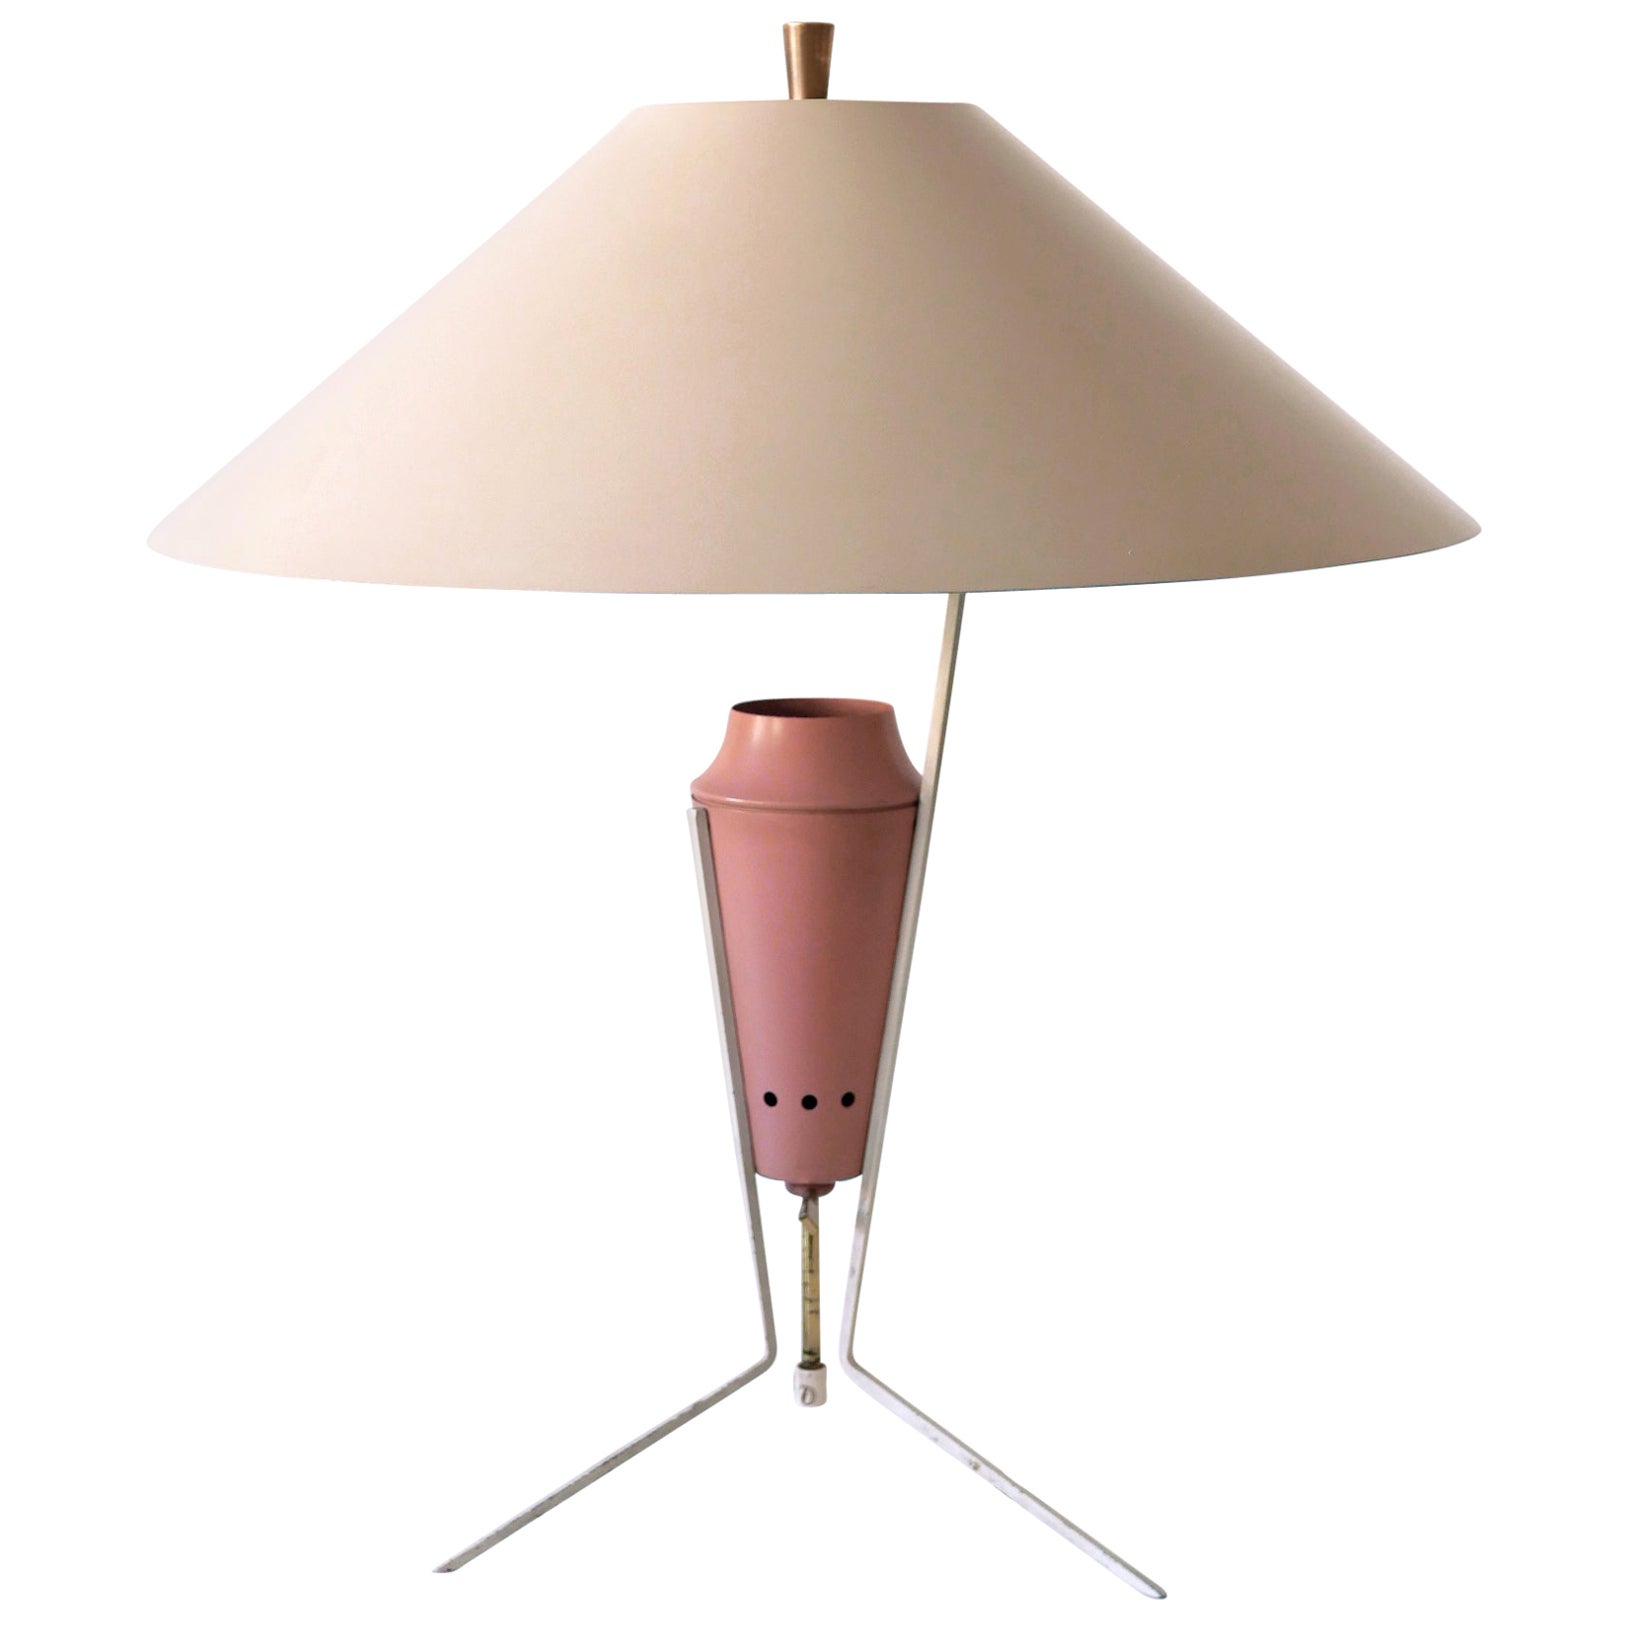 Exceptional Large & Elegant Mid Century Modern Table Lamp Germany 1950s For Sale